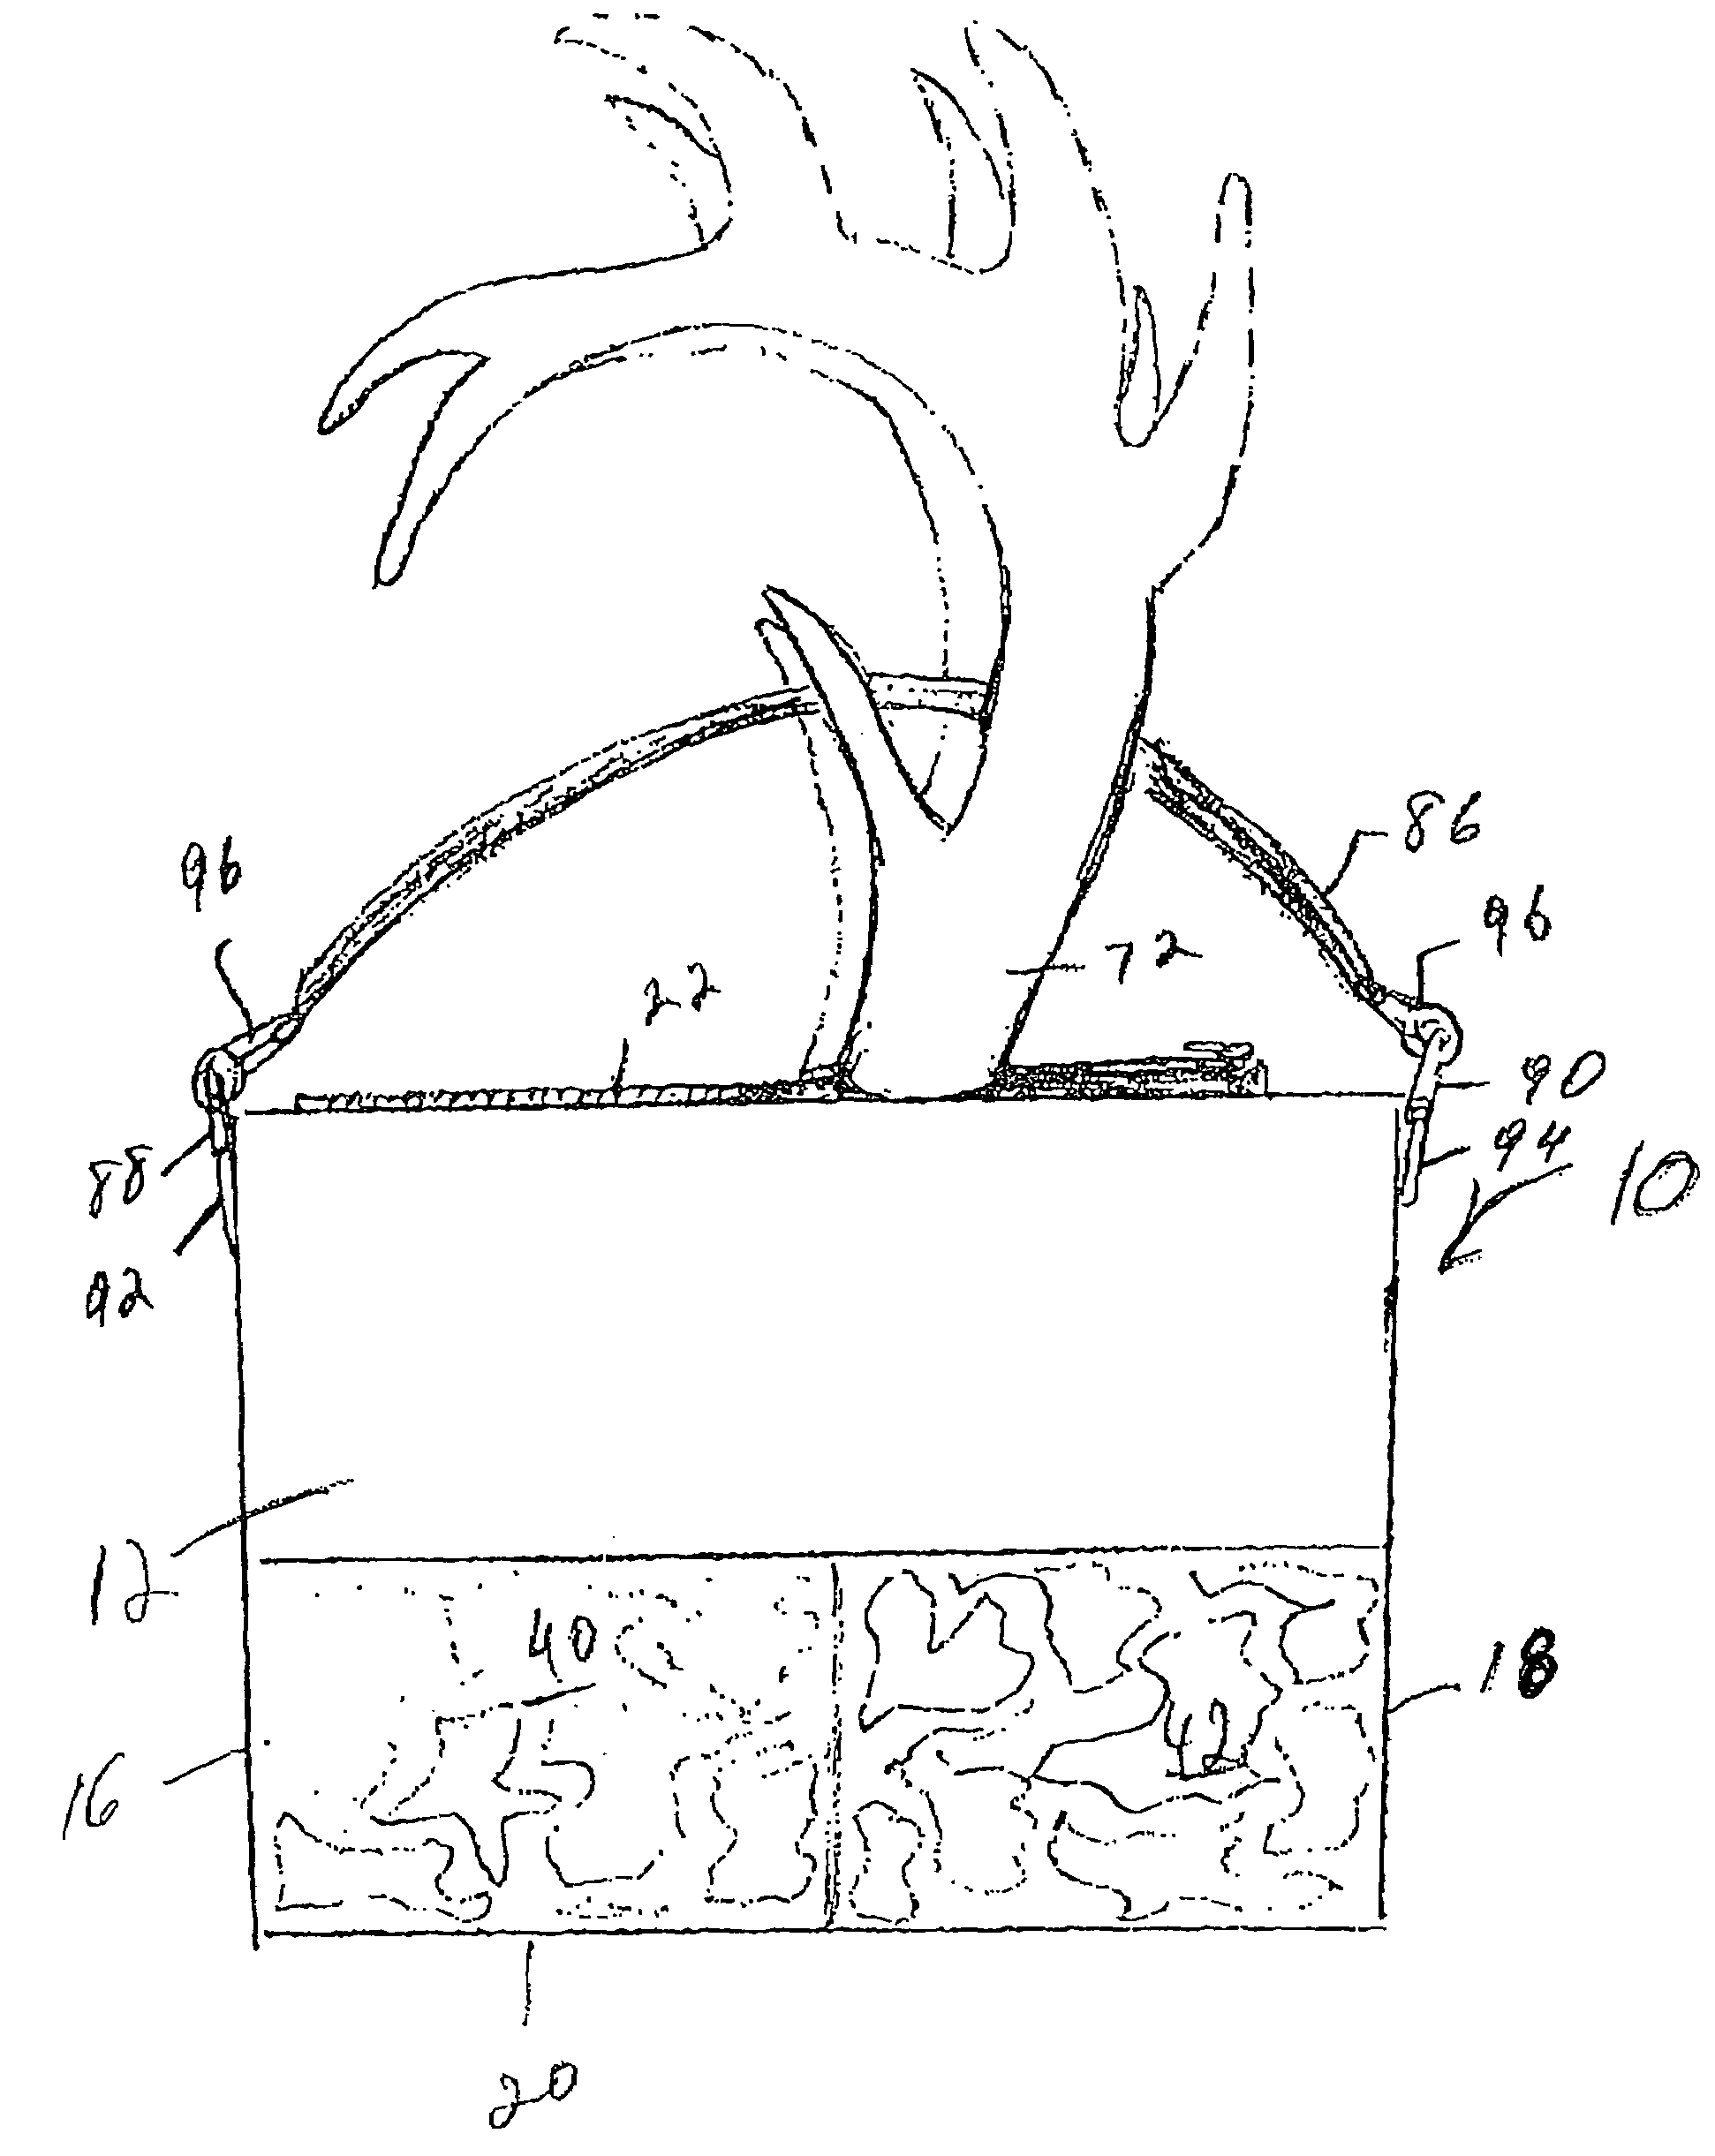 Cooler for transporting an animal carcass